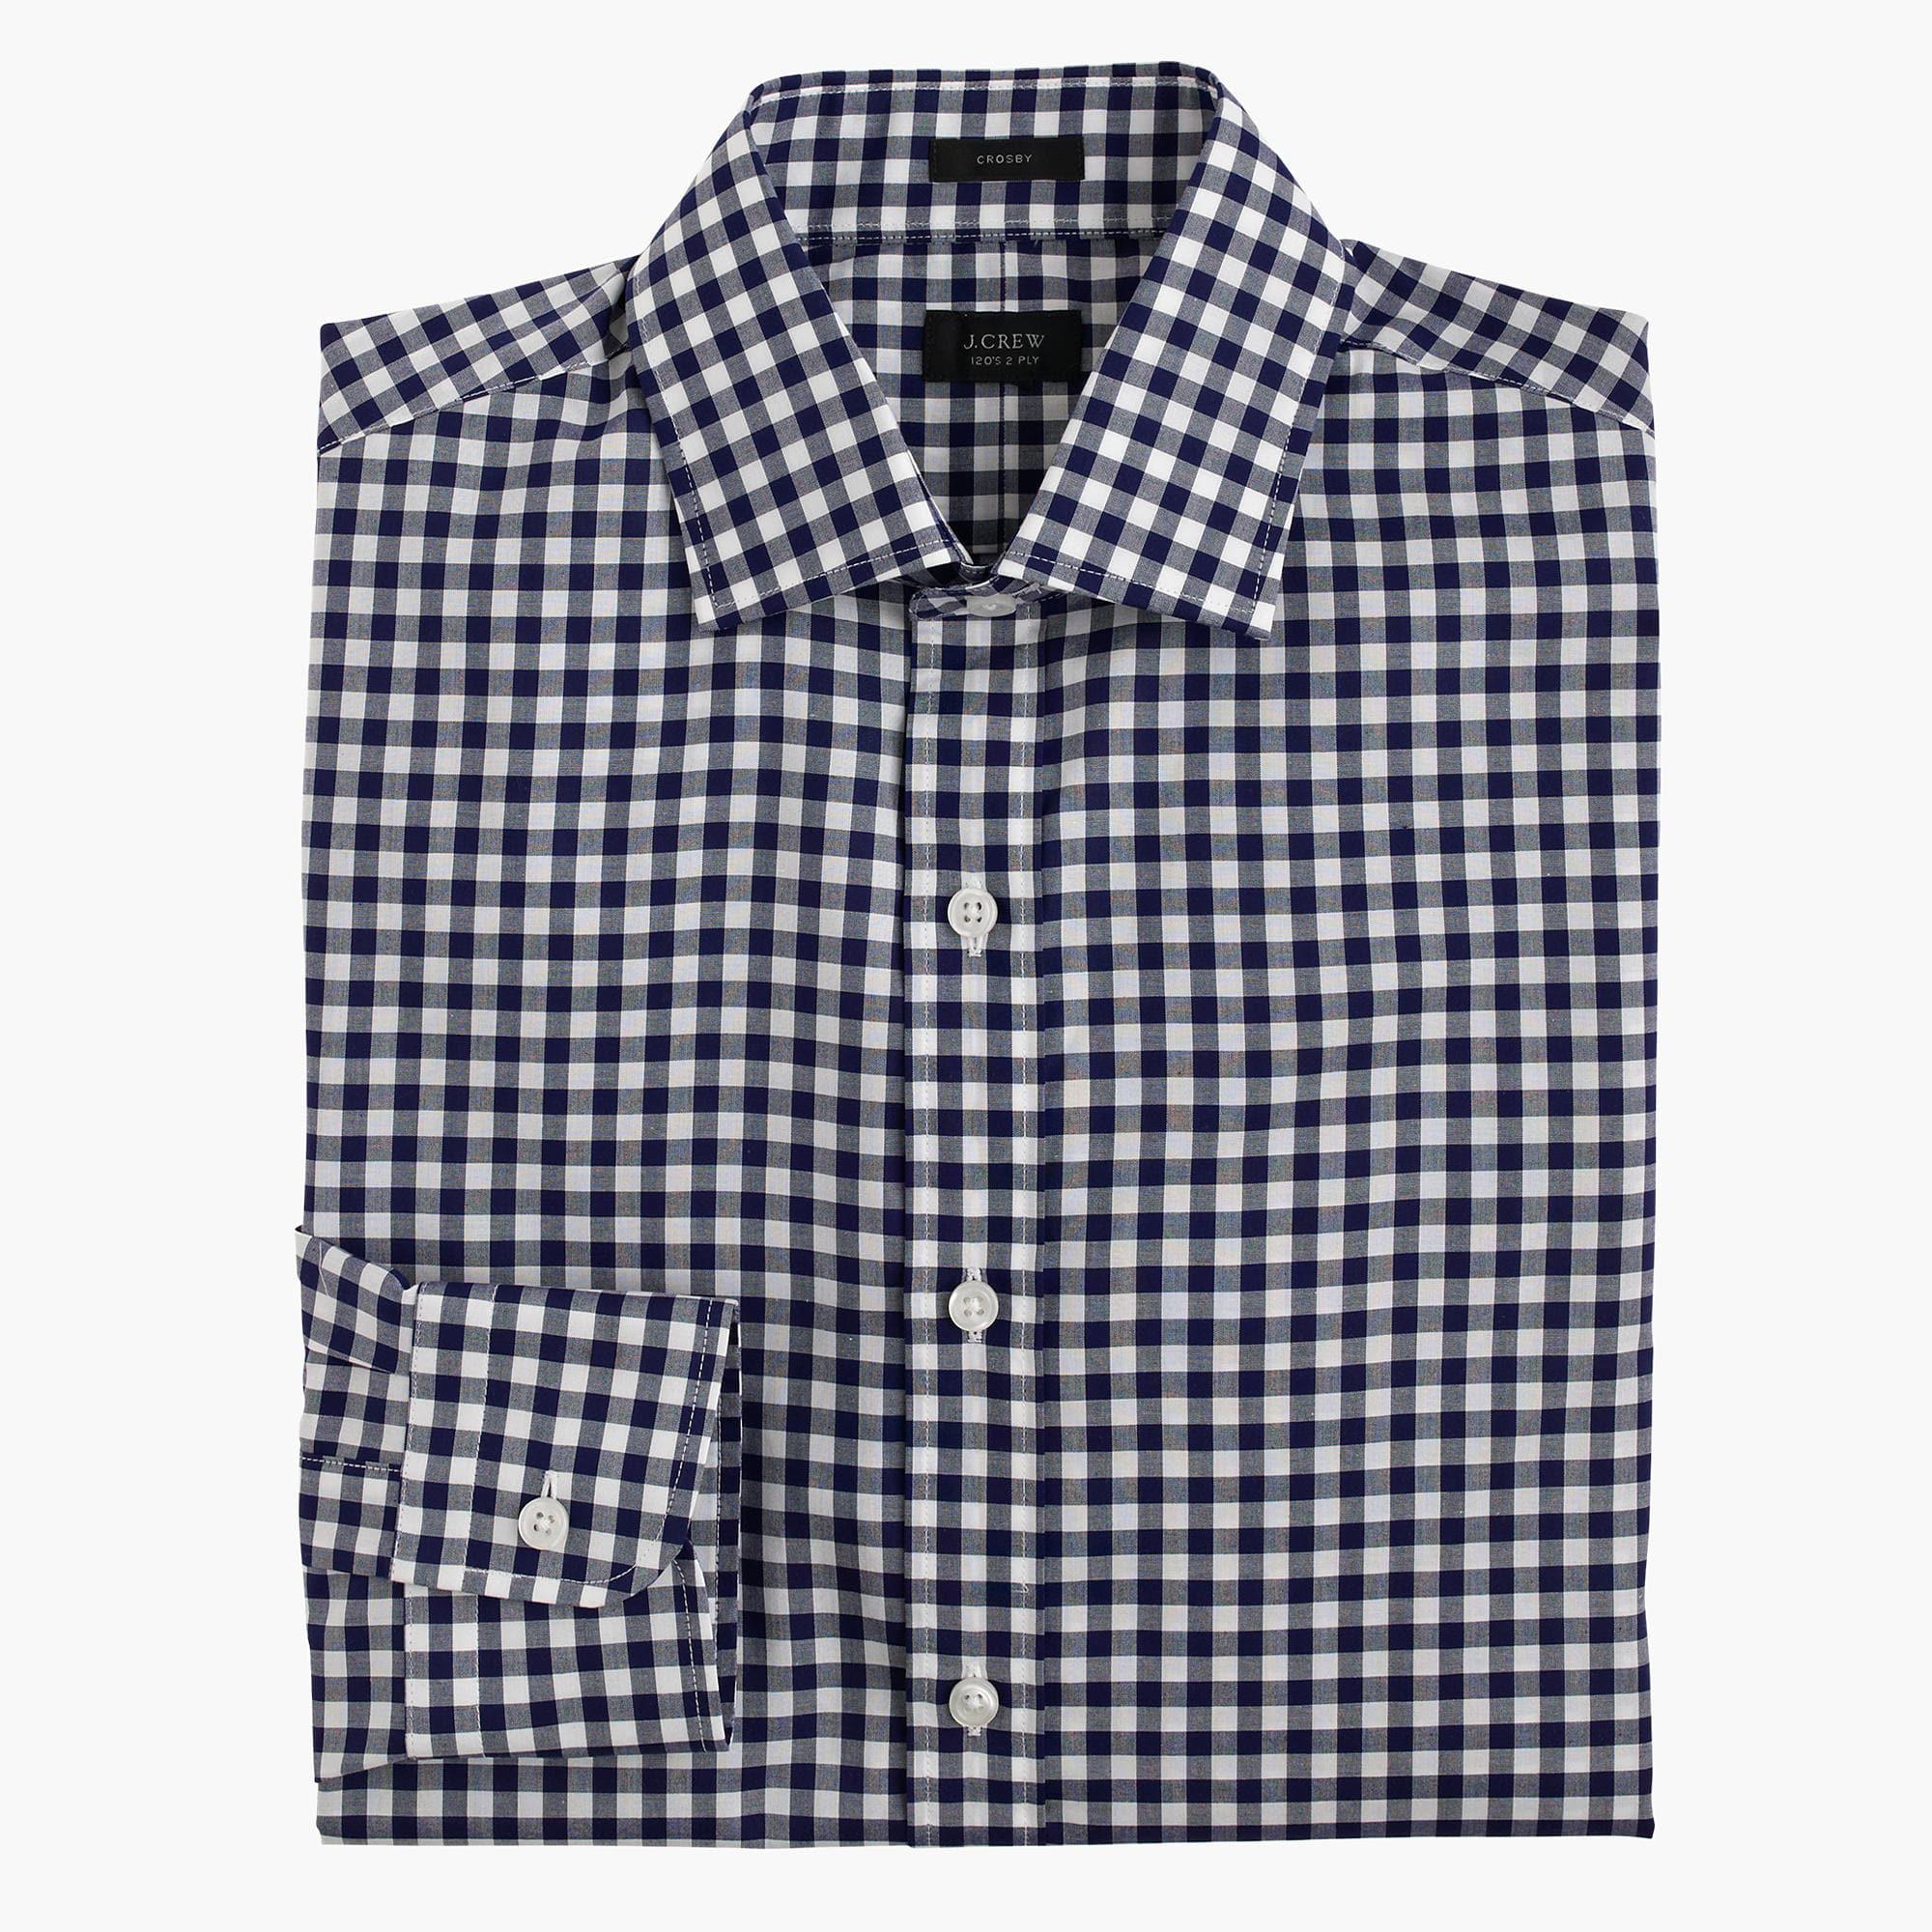 Lyst - J.Crew Crosby Shirt In Classic Navy Gingham in Blue for Men